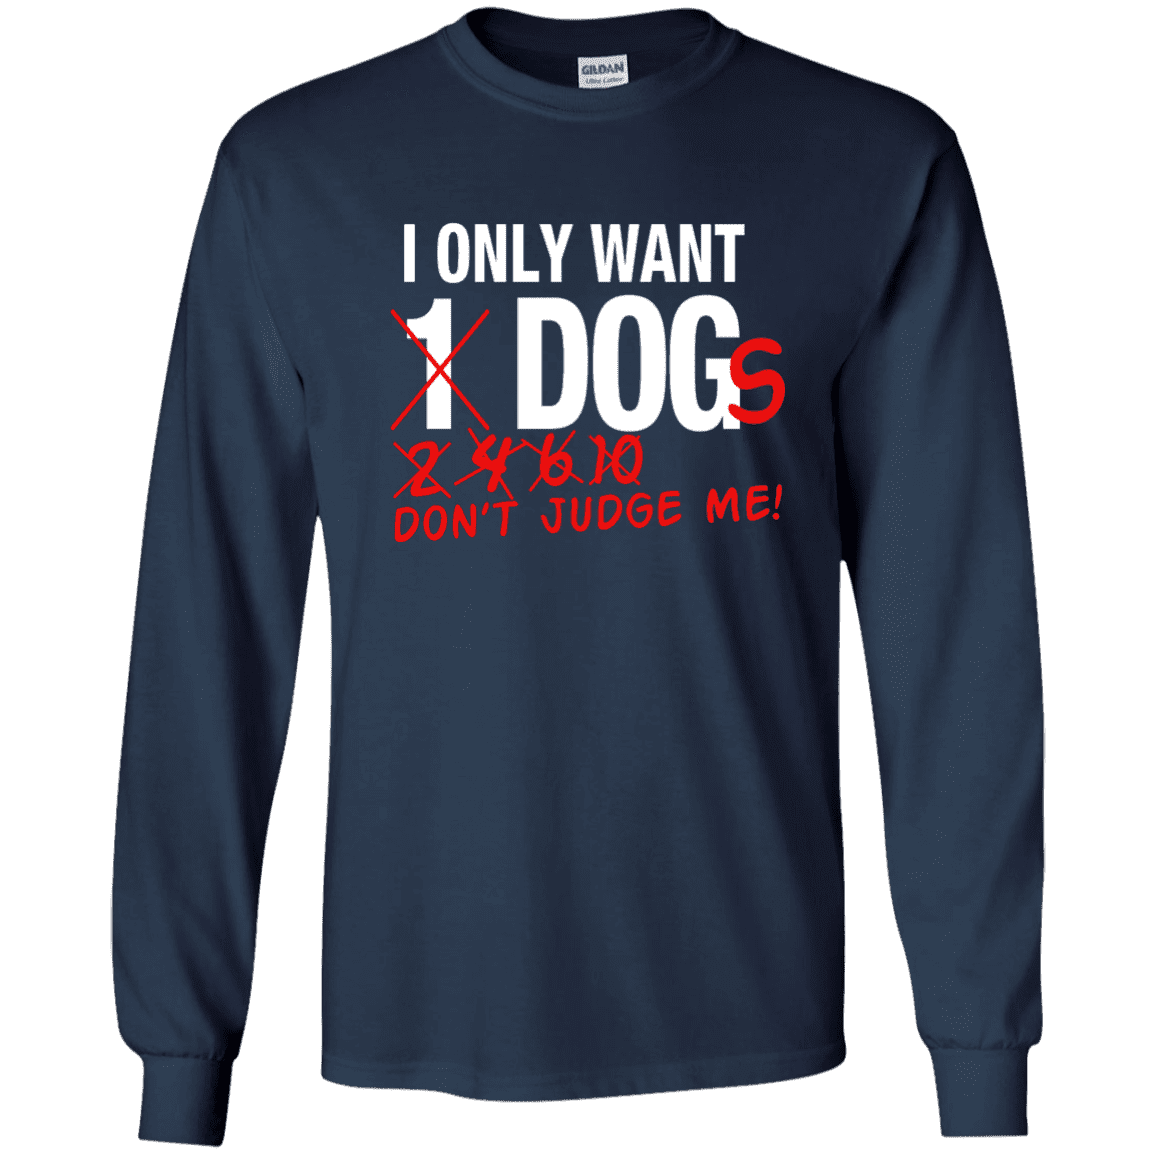 I Only Want 1 Dog - Long Sleeve T Shirt.